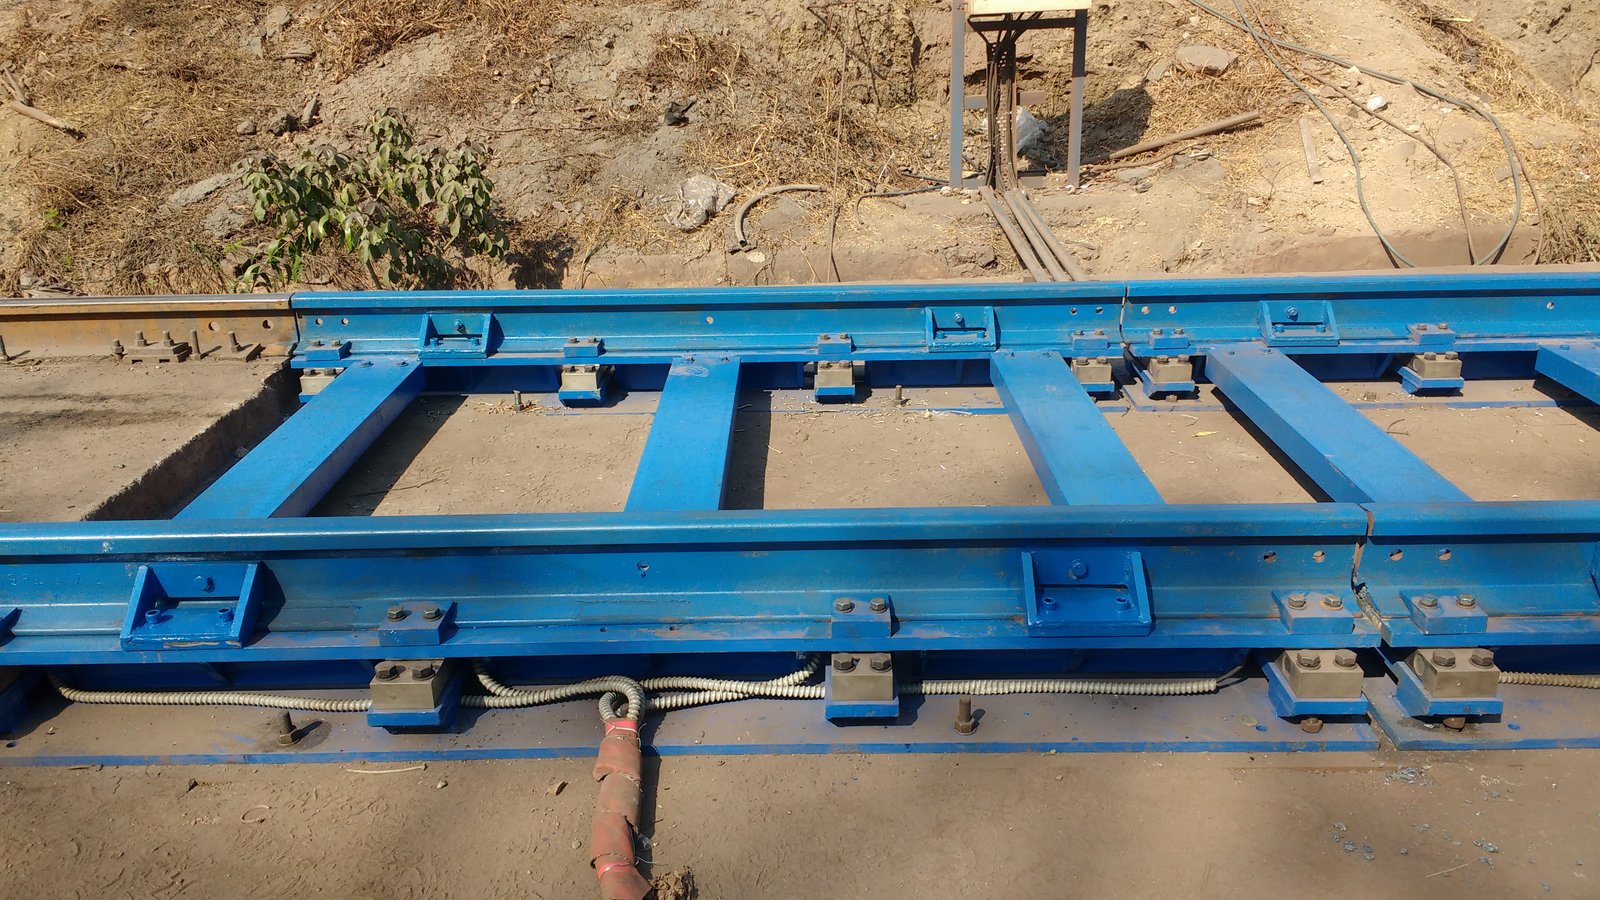 Laddle Turret Weighing System, Ladle Car Weighing System,Weighing System, Ladle Car Weighing System, Toll Weighing System